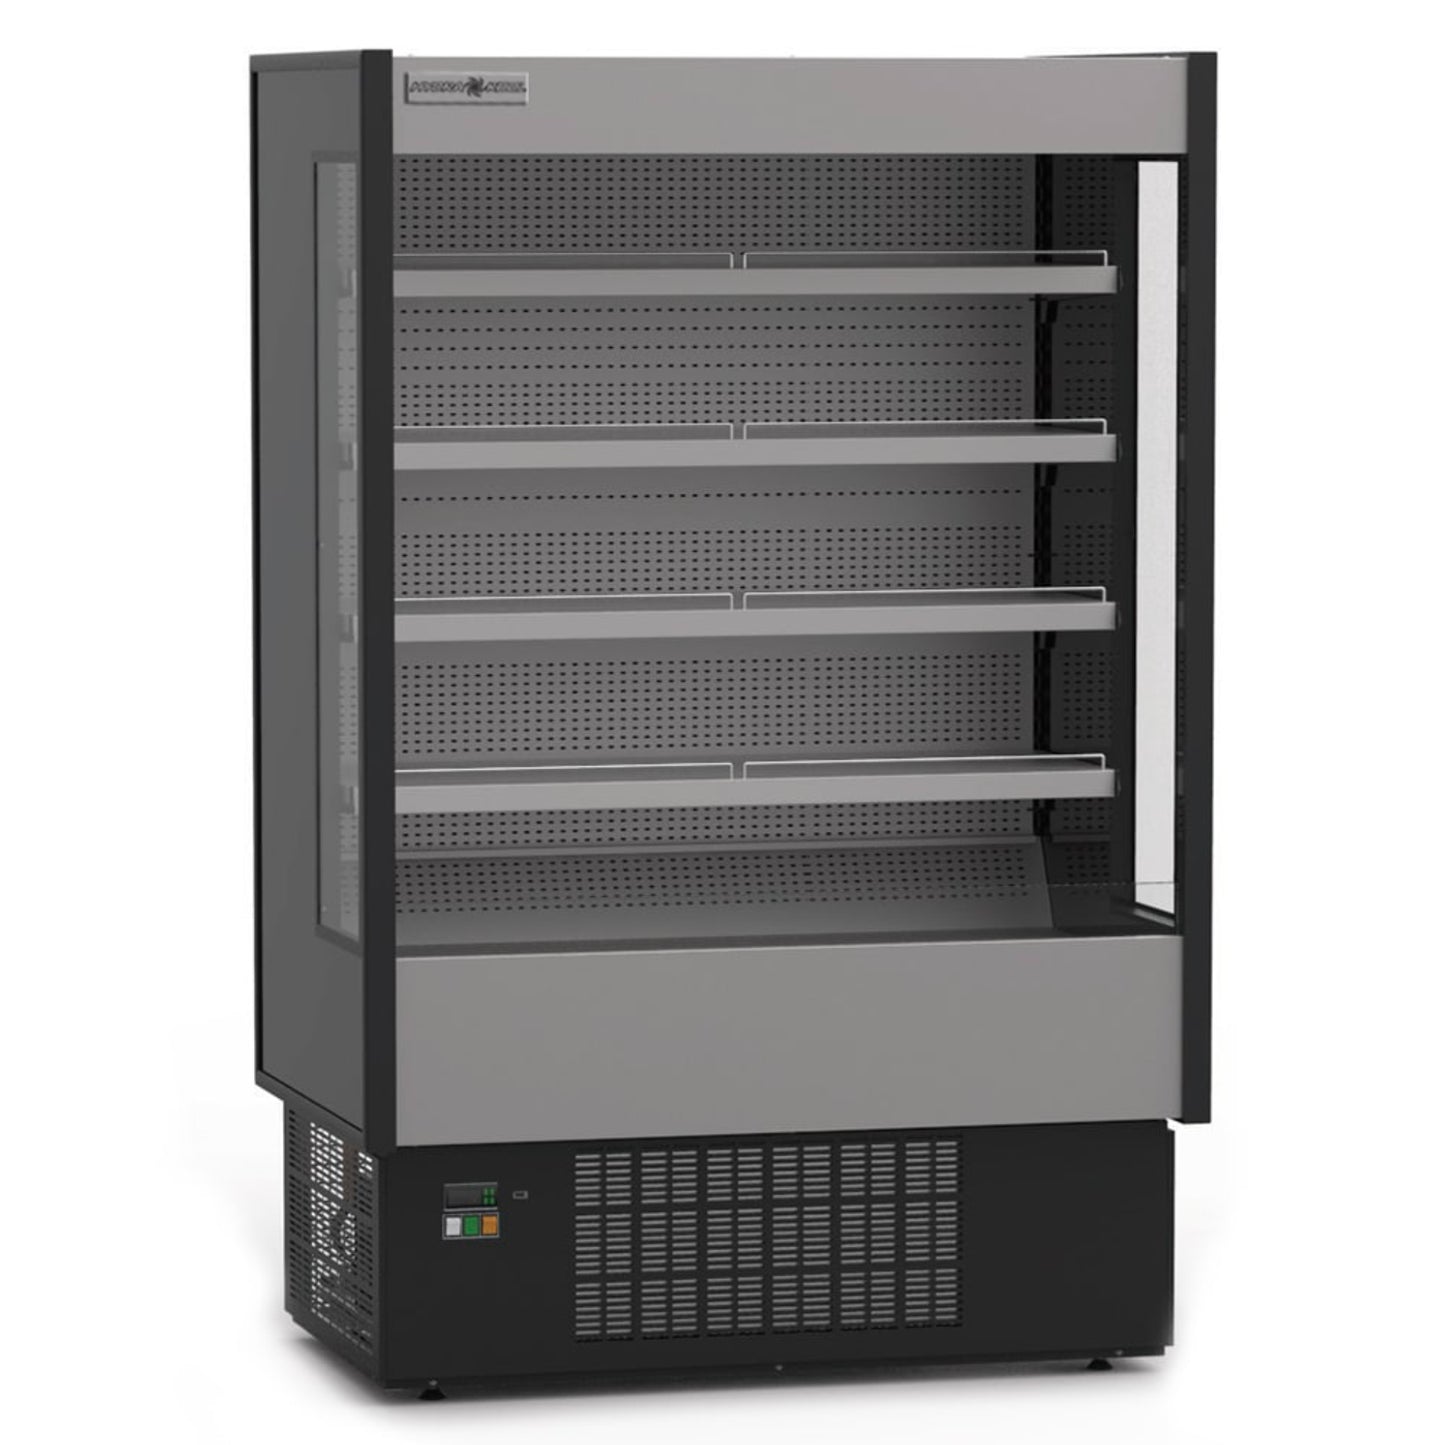 Hydra-Kool KGH-OF-60-S 60" Grab And Go High Profile Self-Contained